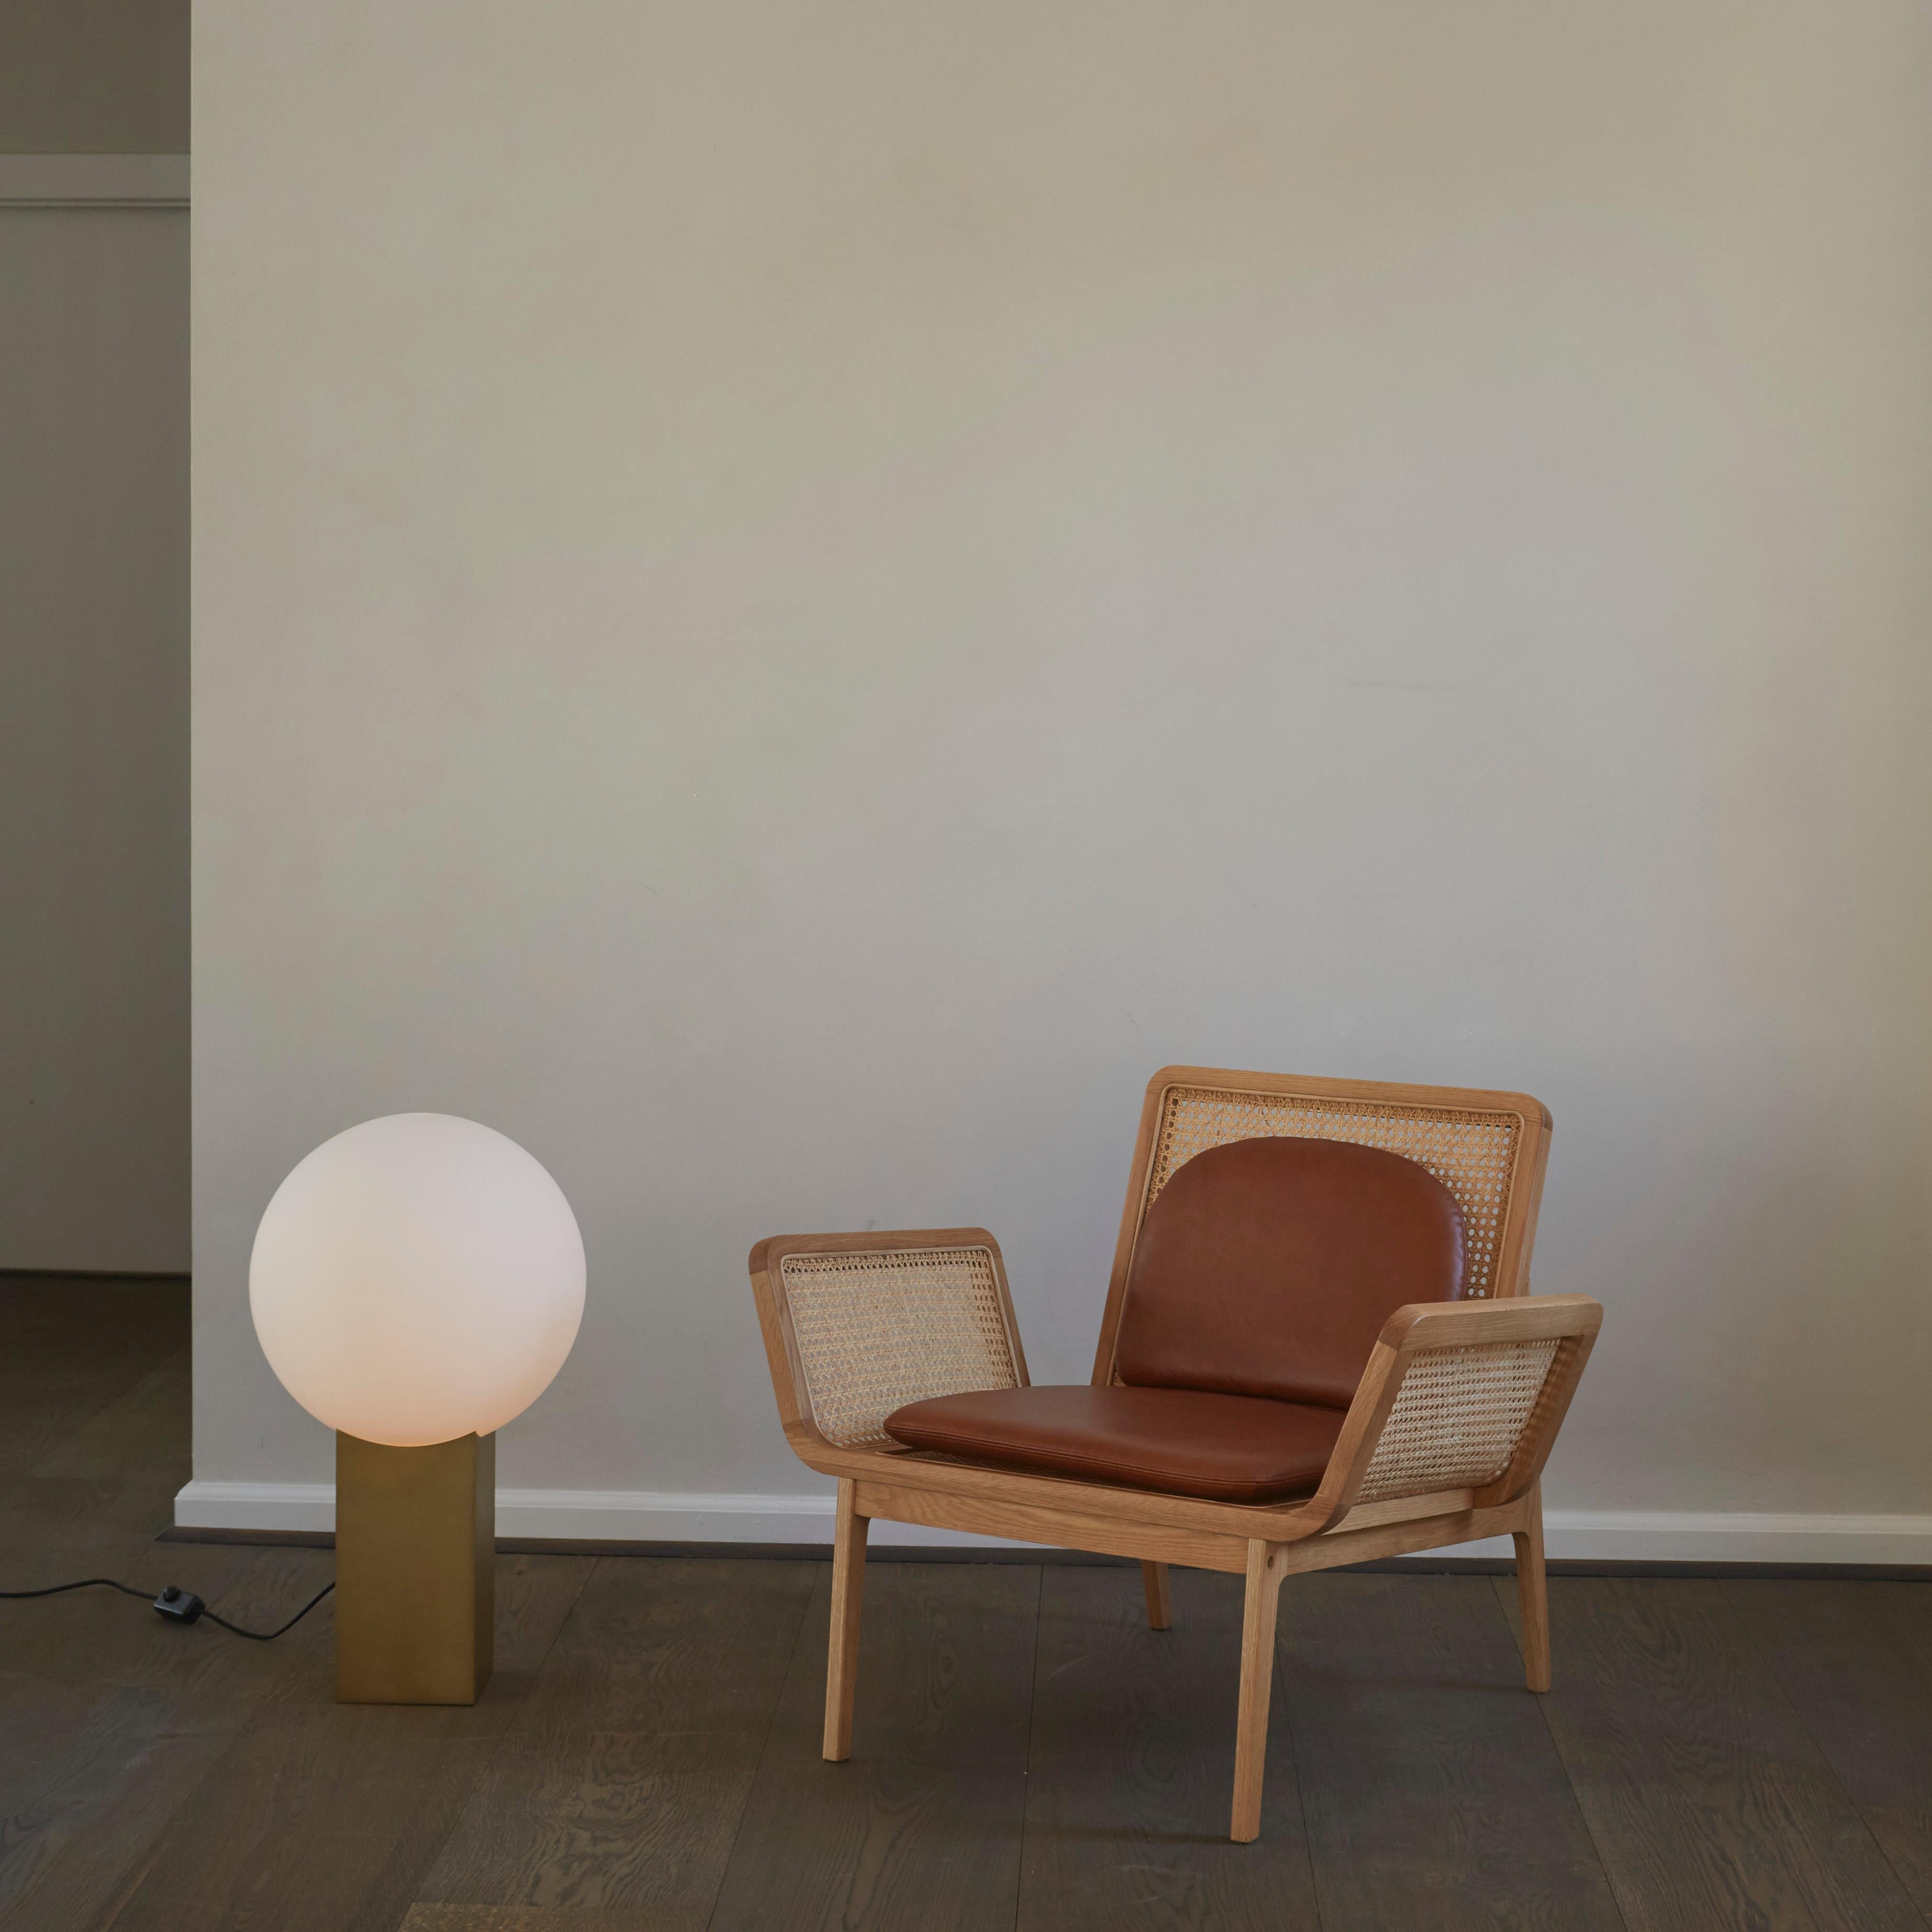 Brass Hoop floor lamp by 101 Copenhagen
Designed by Nicolaj Nøddesbo & Tommy Hyldahl
Dimensions: L 40 x W 40 x H 70 cm
Cable length: 200 cm
This product is not wired for USA
Materials: Metal: Plated metal / Brass
Opal glass / White
Cable: Fabric